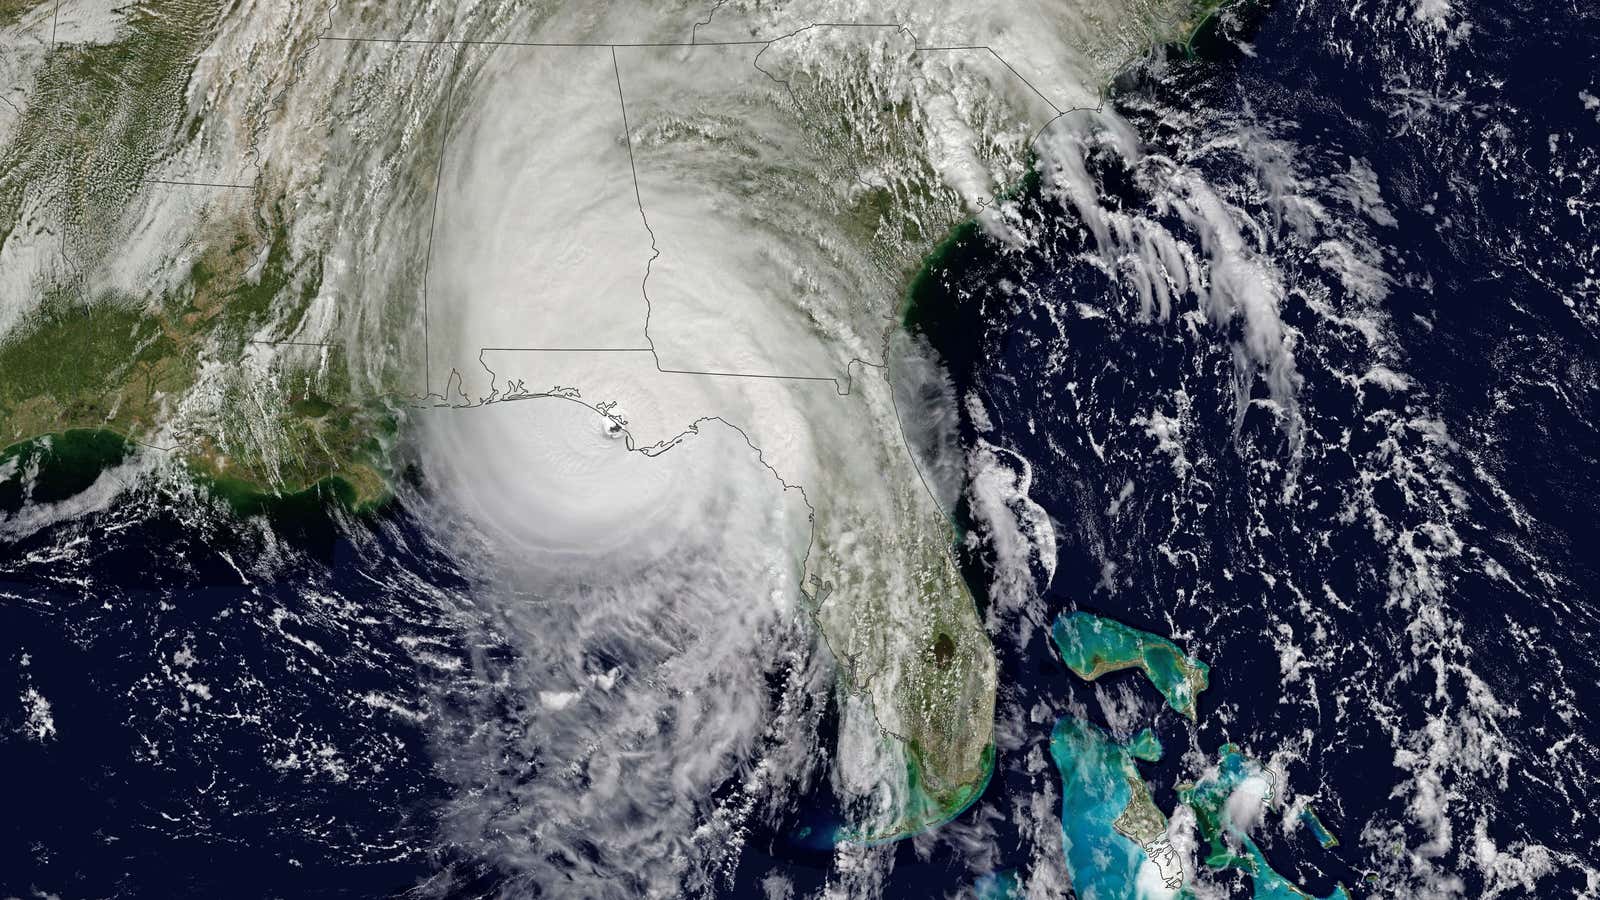 Hurricane Michael touched down on Wednesday in Florida as a strong Category 4 storm, on the cusp of being a Category 5.